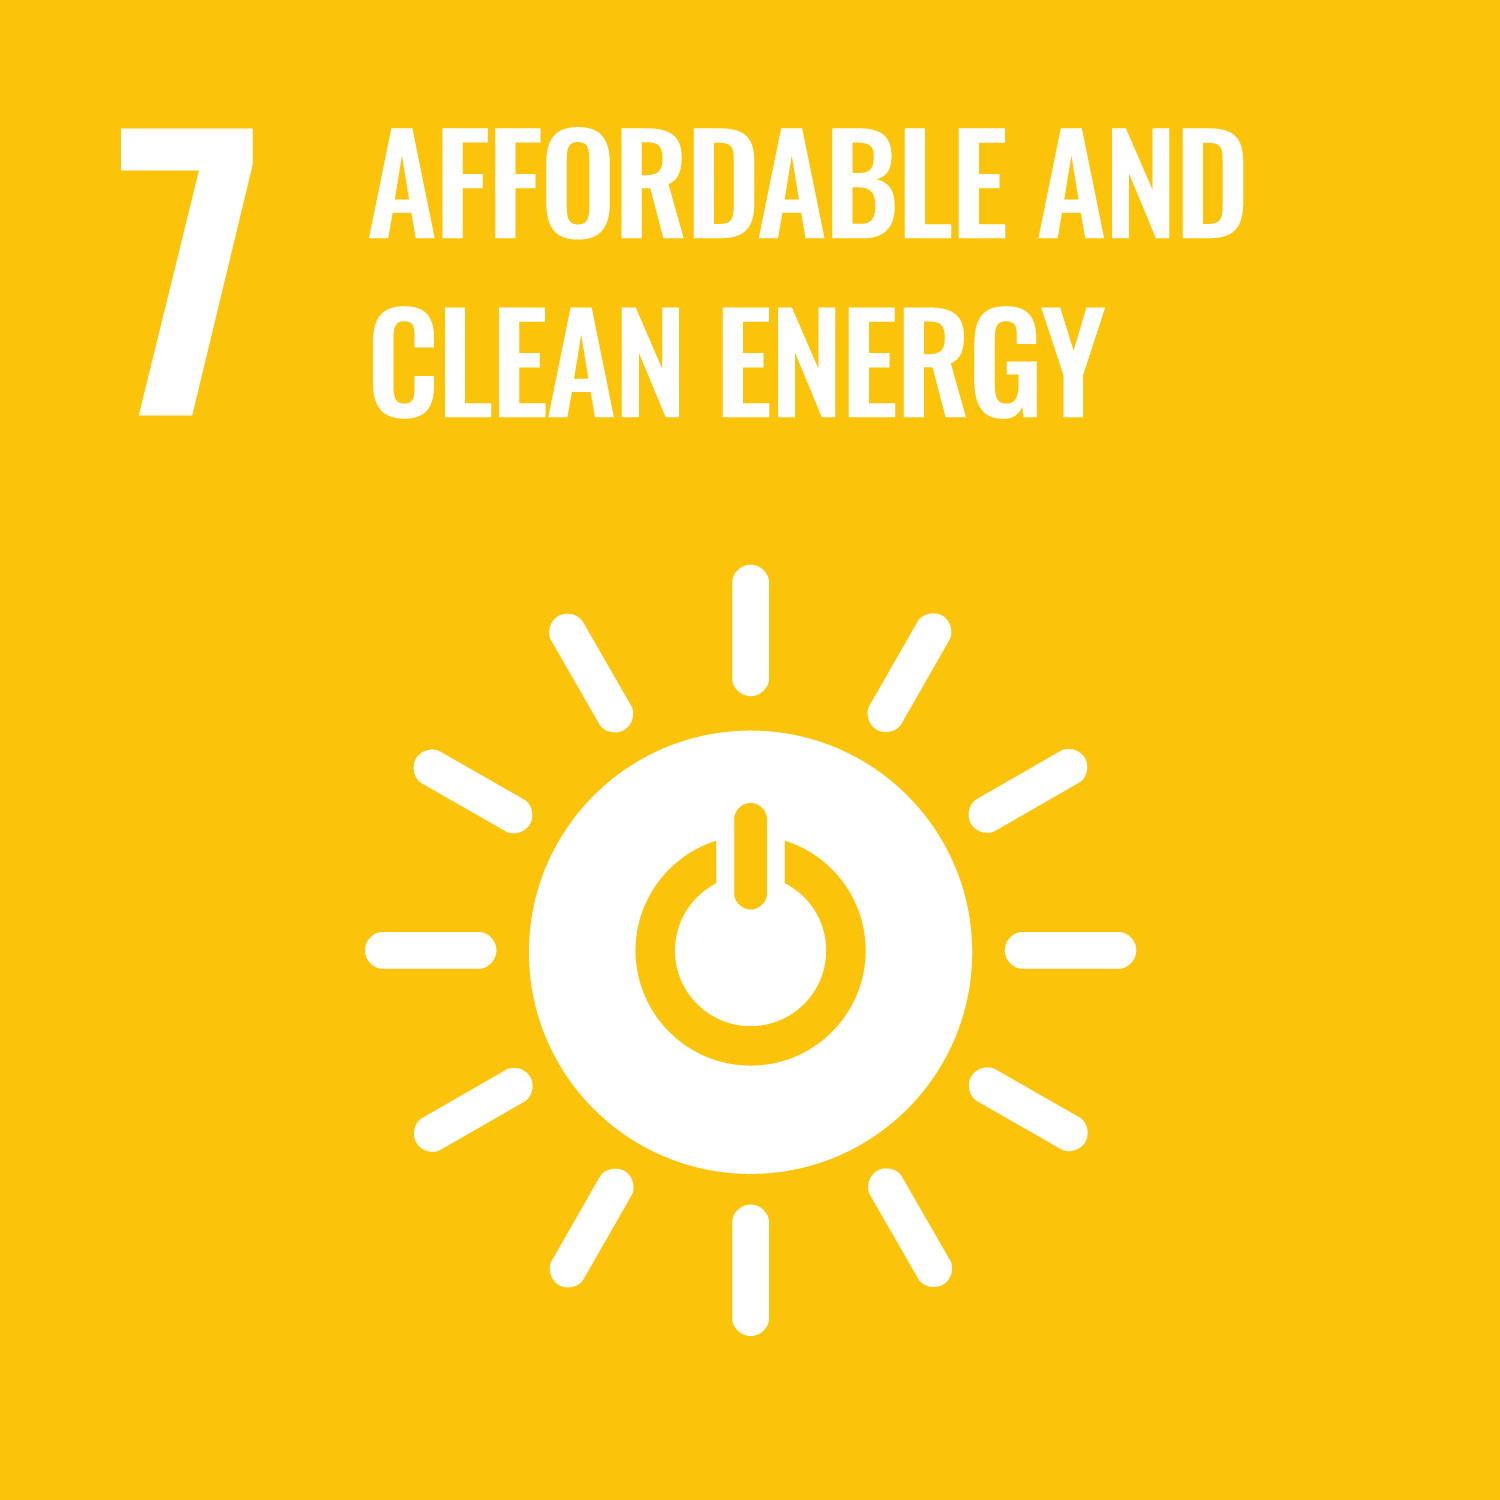 Sustainable Development Goal #07 (Affordable and Clean Energy)